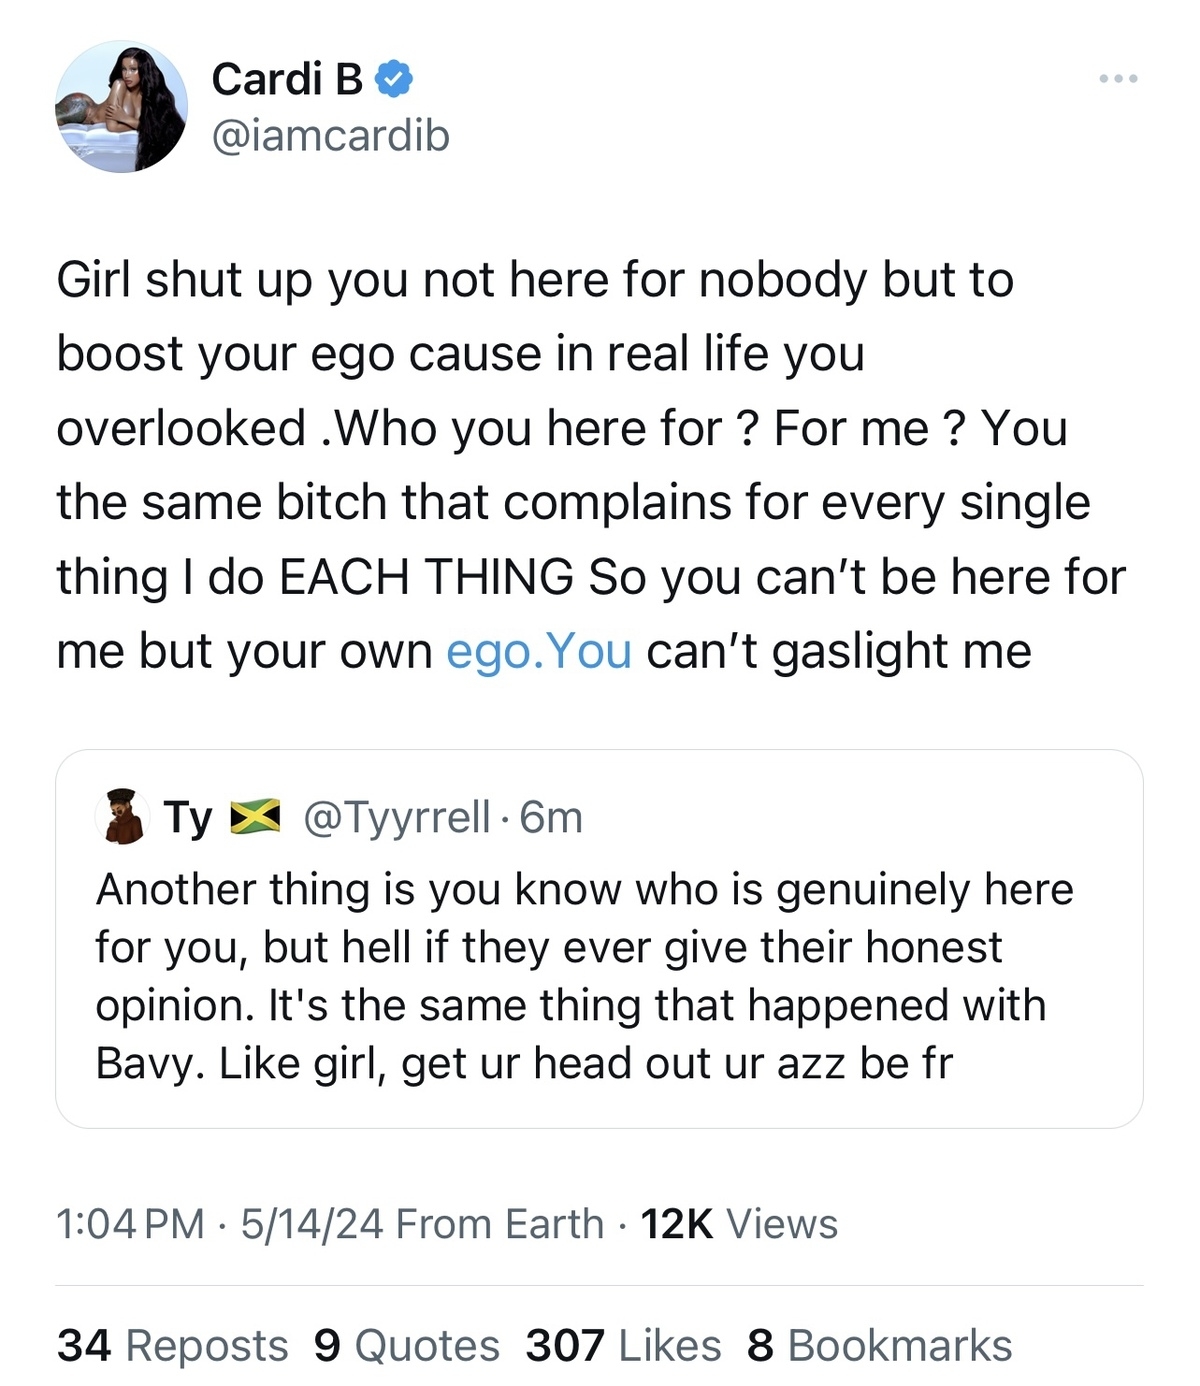 Cardi B exchanges tweets with user Tyrell; discusses authenticity and not being gaslighted in a public conversation